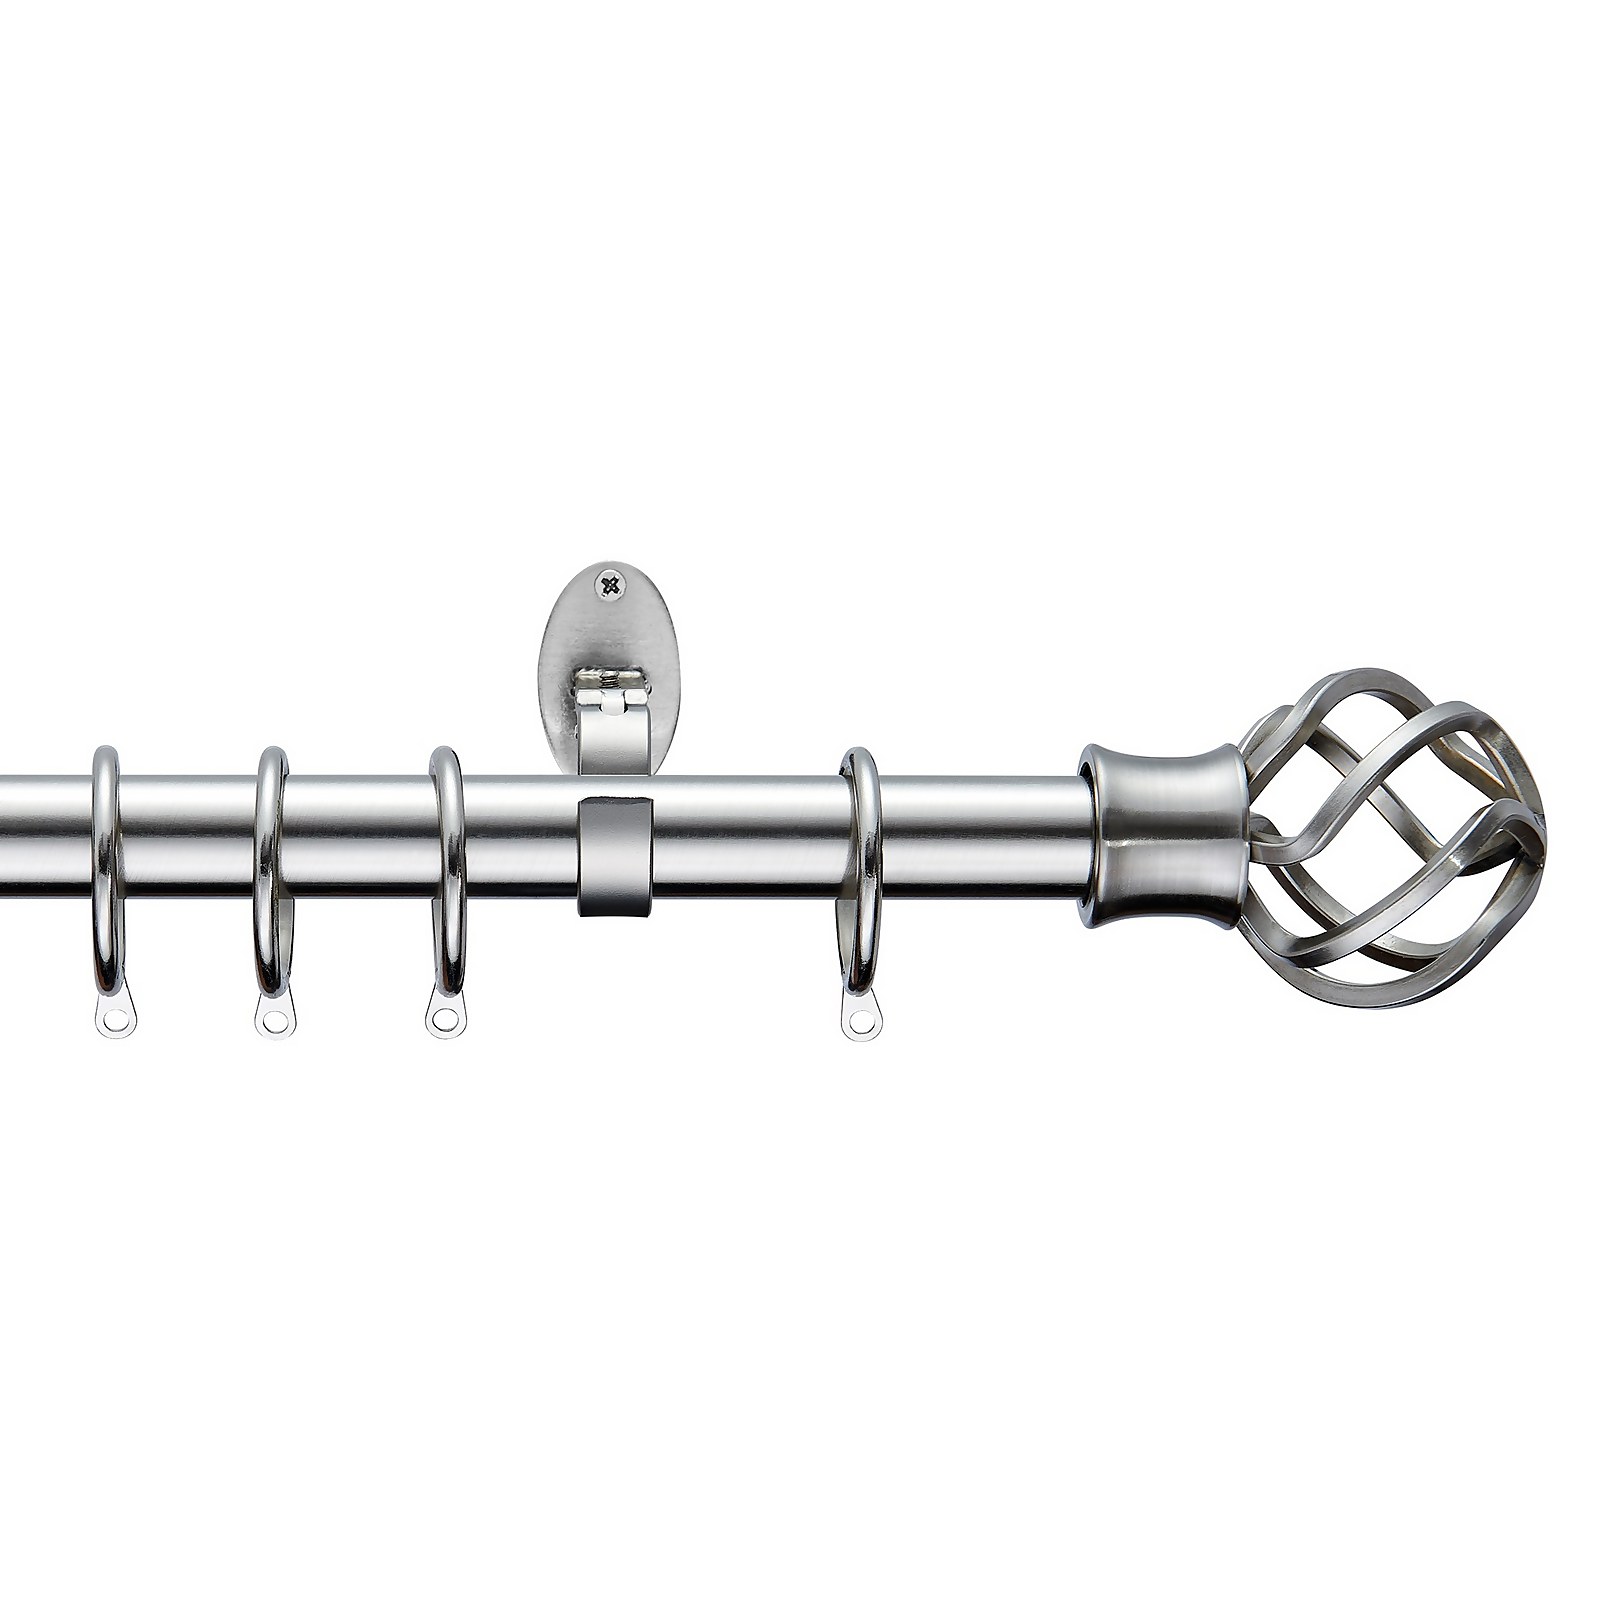 Photo of Extendable Curtain Pole With Cage Ball Finial - Steel